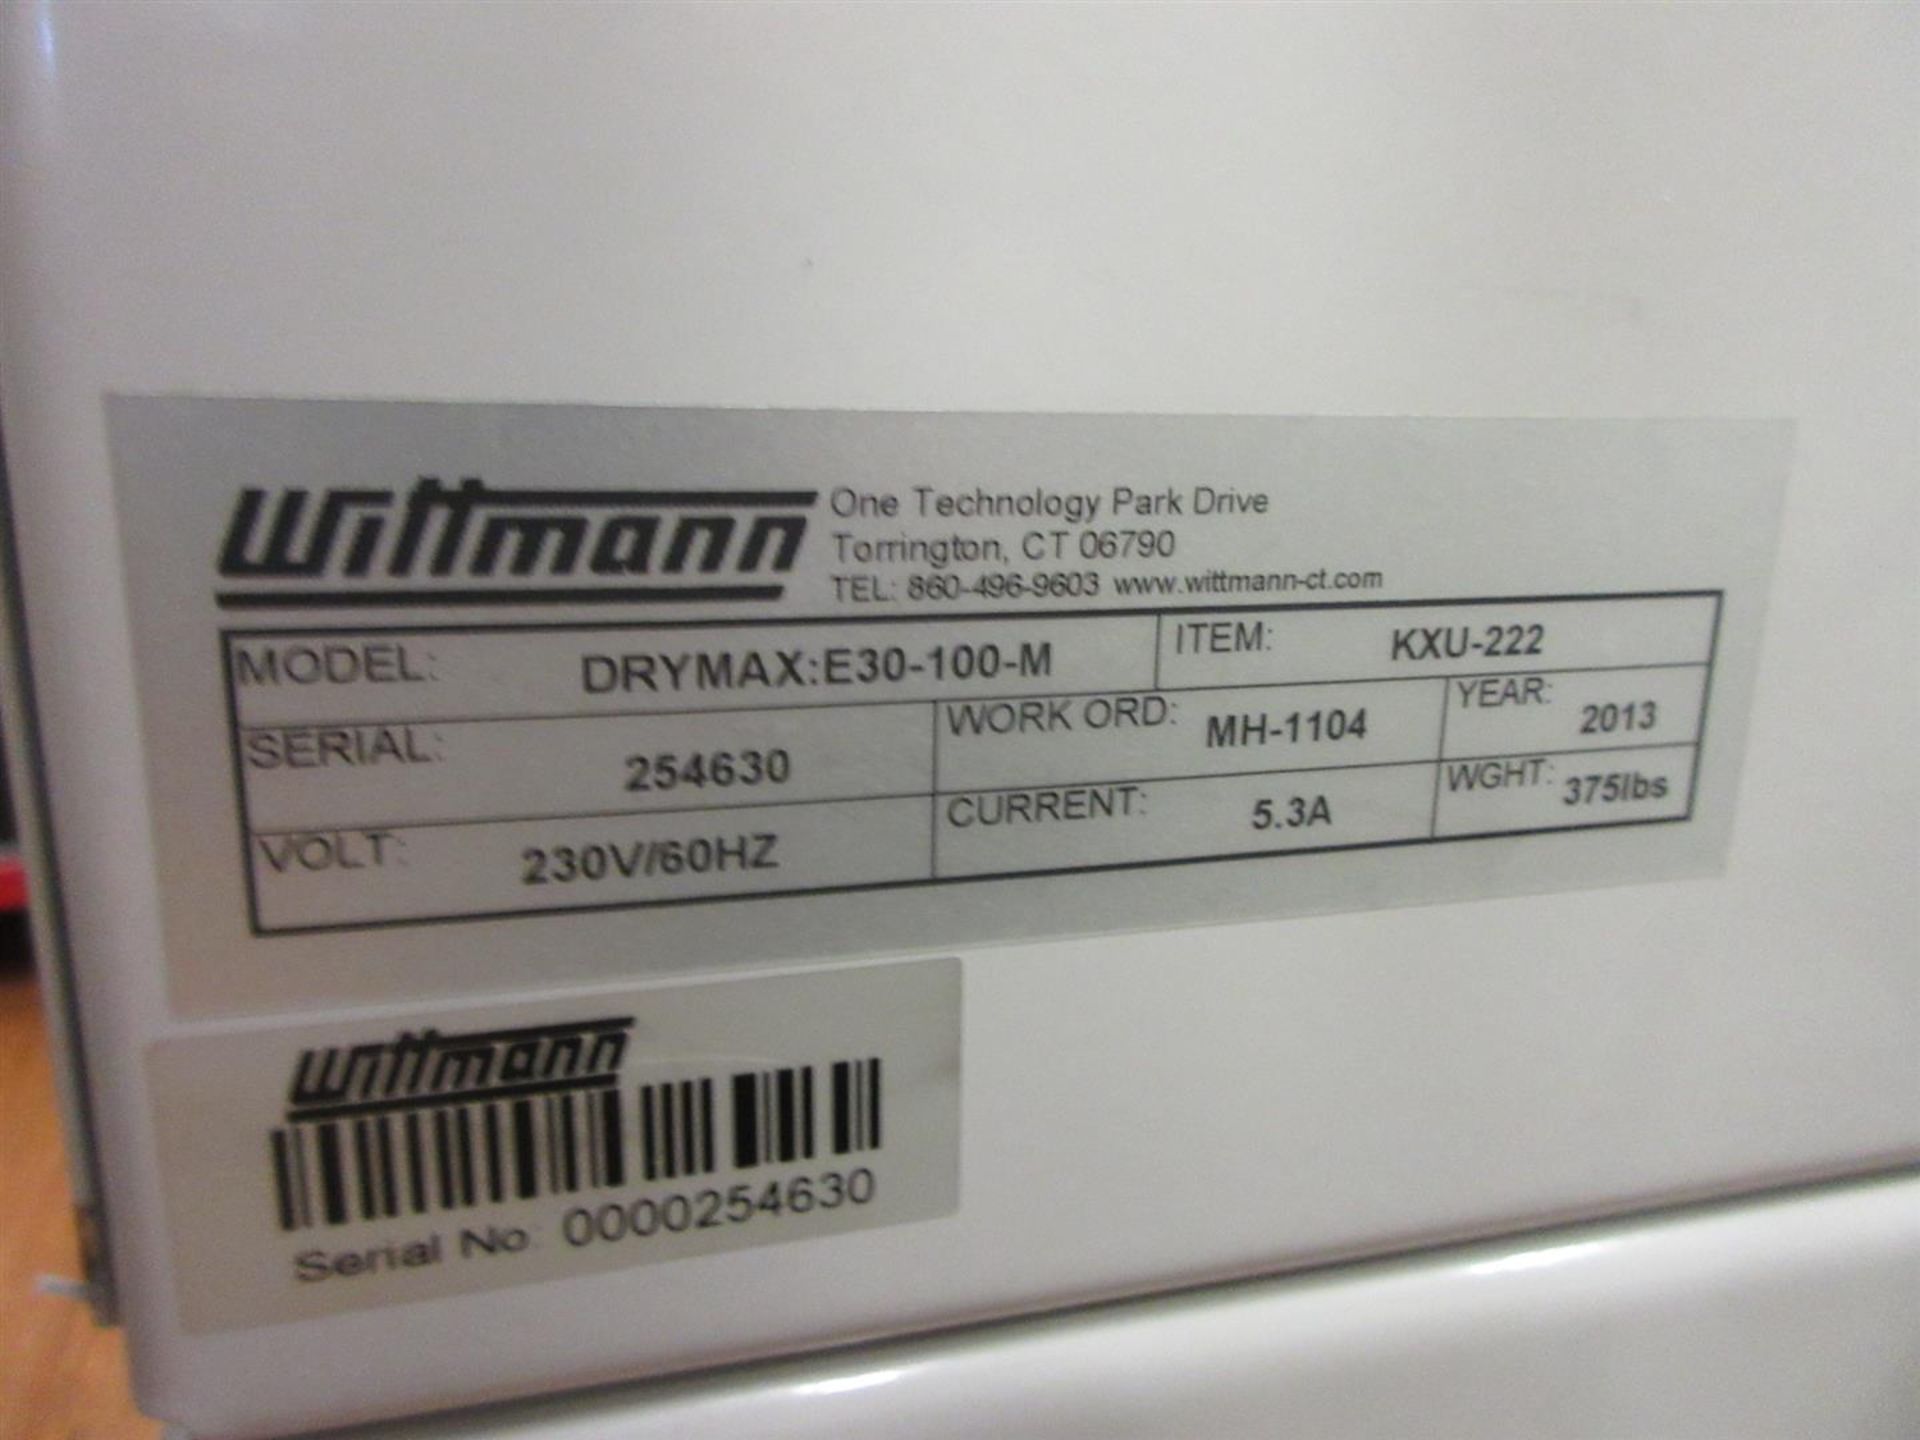 WITTMANN DRYER, MODEL DRYMAX E30-188-M; S/N 254630, WITH LOADER (NEW IN 2013) - Image 3 of 3